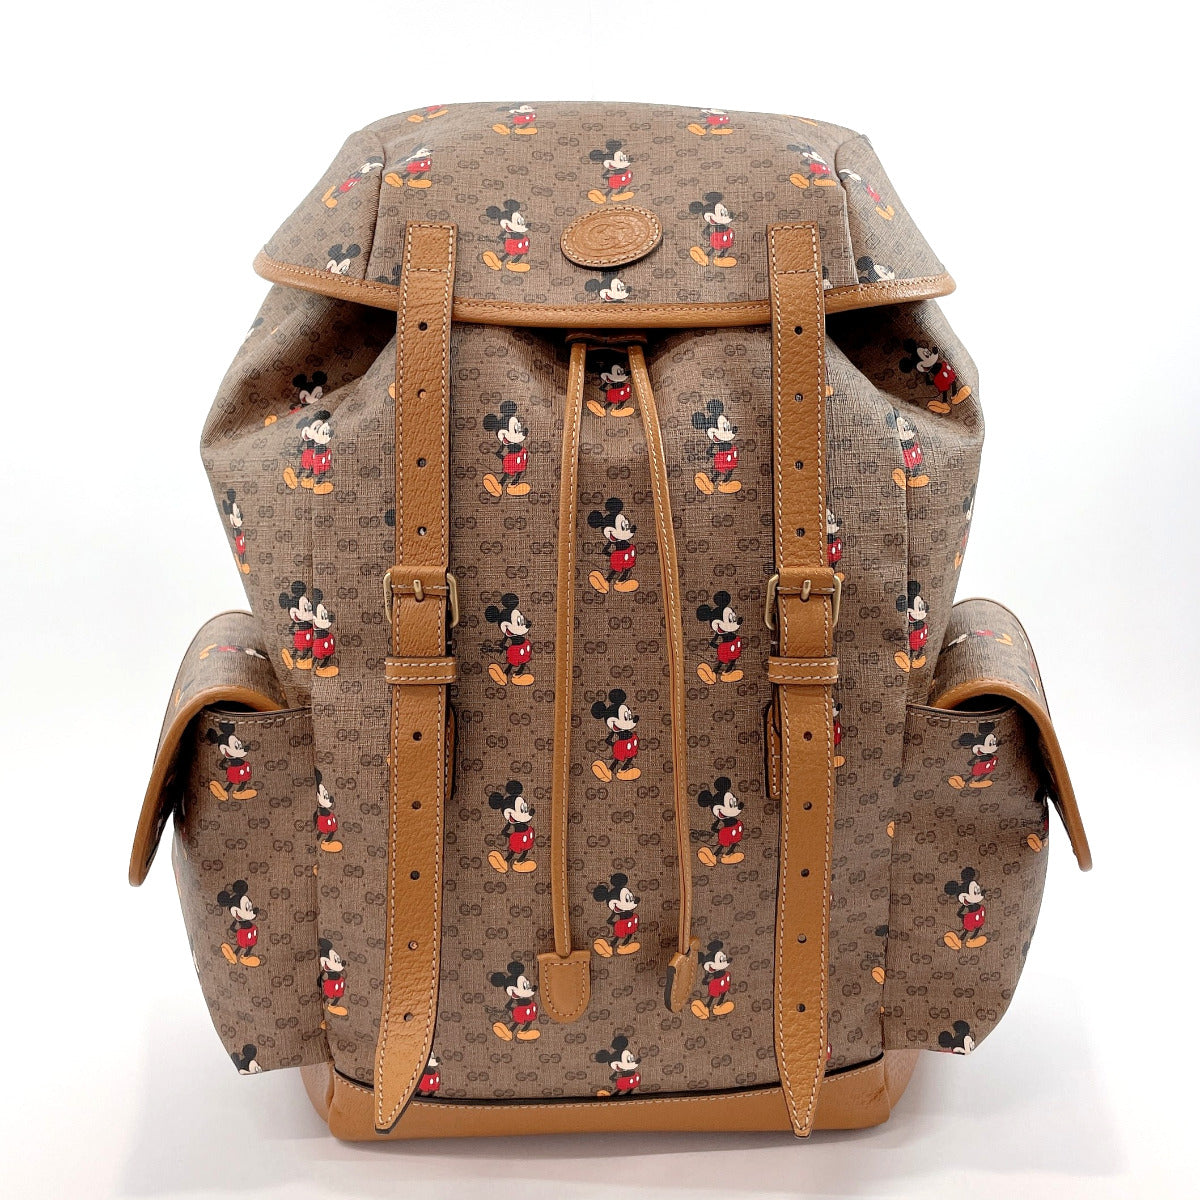 vuitton mickey mouse backpack